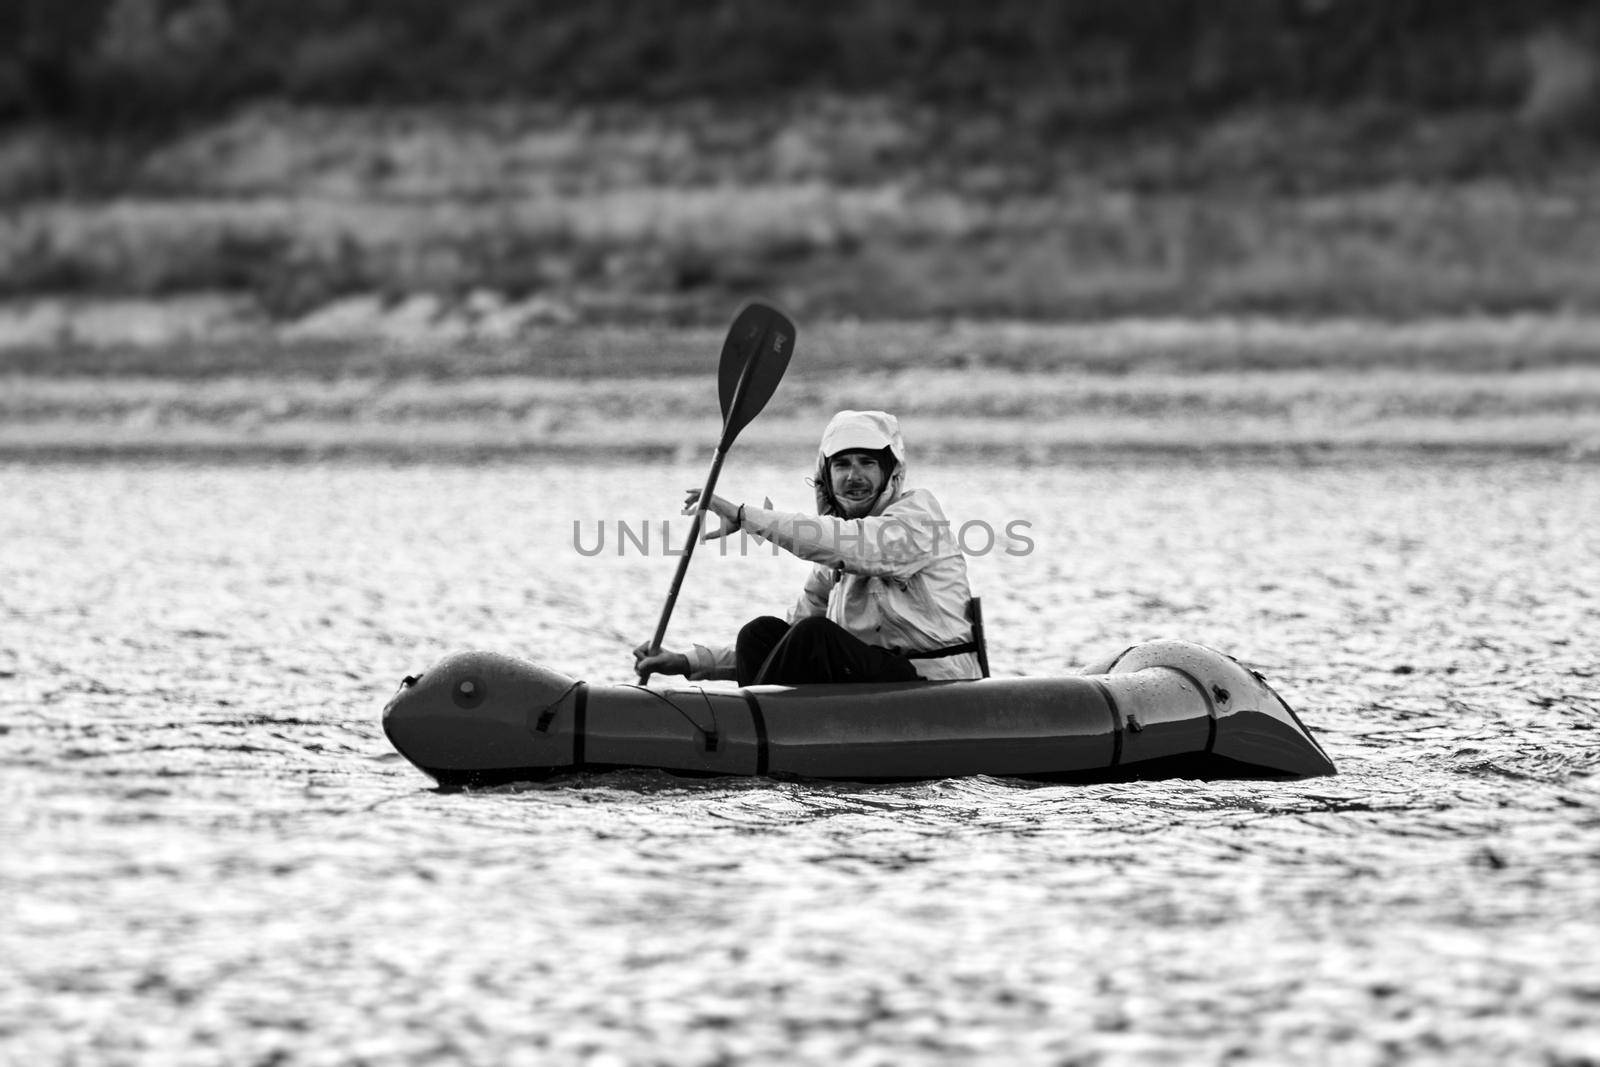 Swim in Packraft. Packraft, one-person light raft used for expedition or adventure racing, on a lake, inflatable boat Ride on a mountain lake by EvgeniyQW